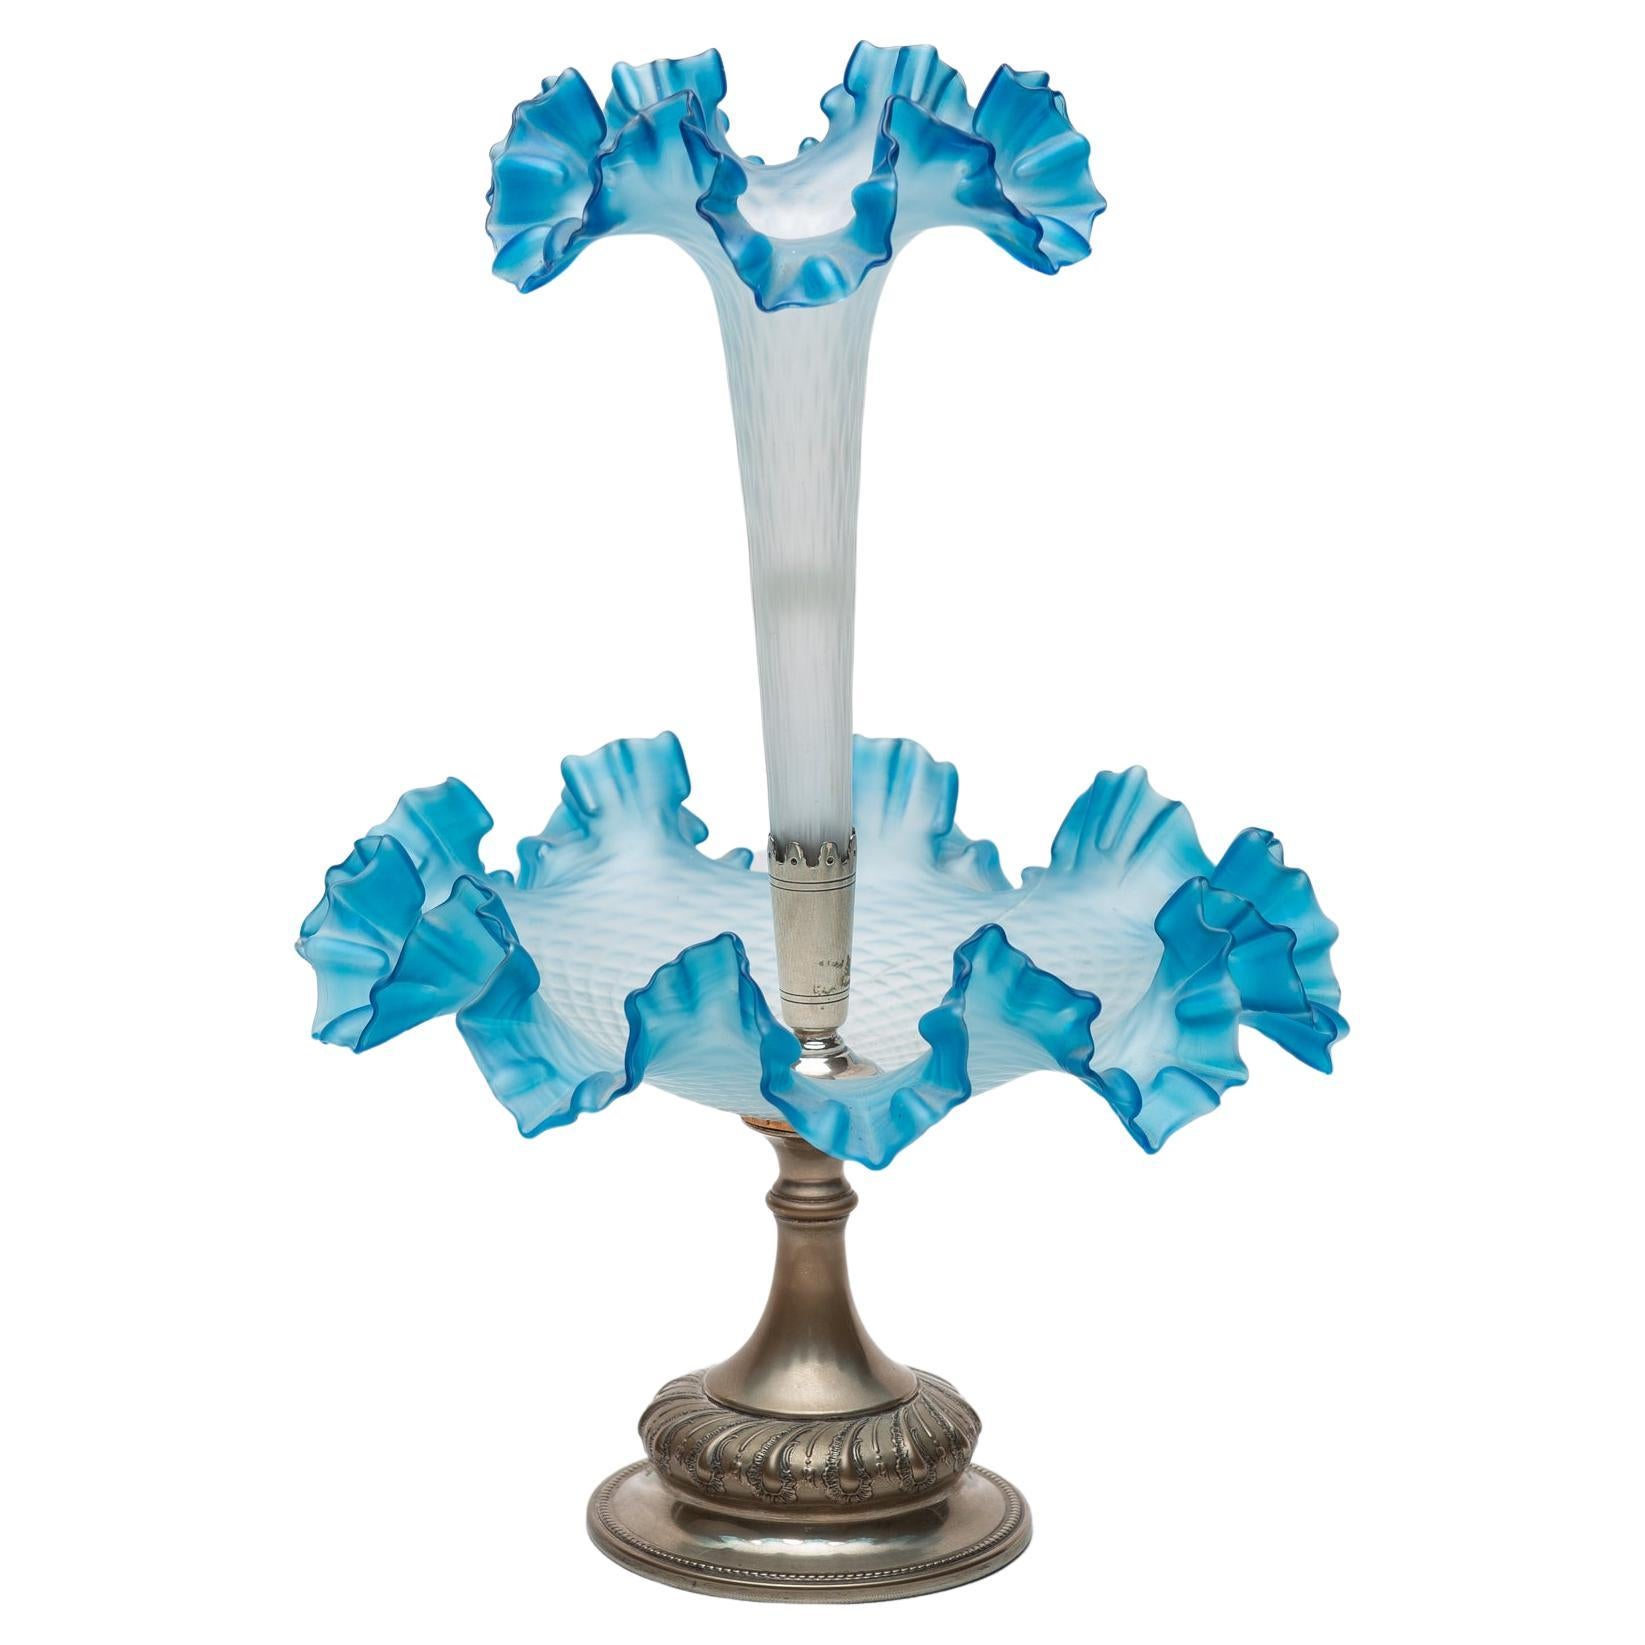 O/6184 - Rare WMF épergne in silver plate and blue glasses, dating back approximately 150/160 years. 
Unfortunately the photographer cracked the larger glass in two places: however it is still whole.
Therefore its value dropped from € 2500 to €